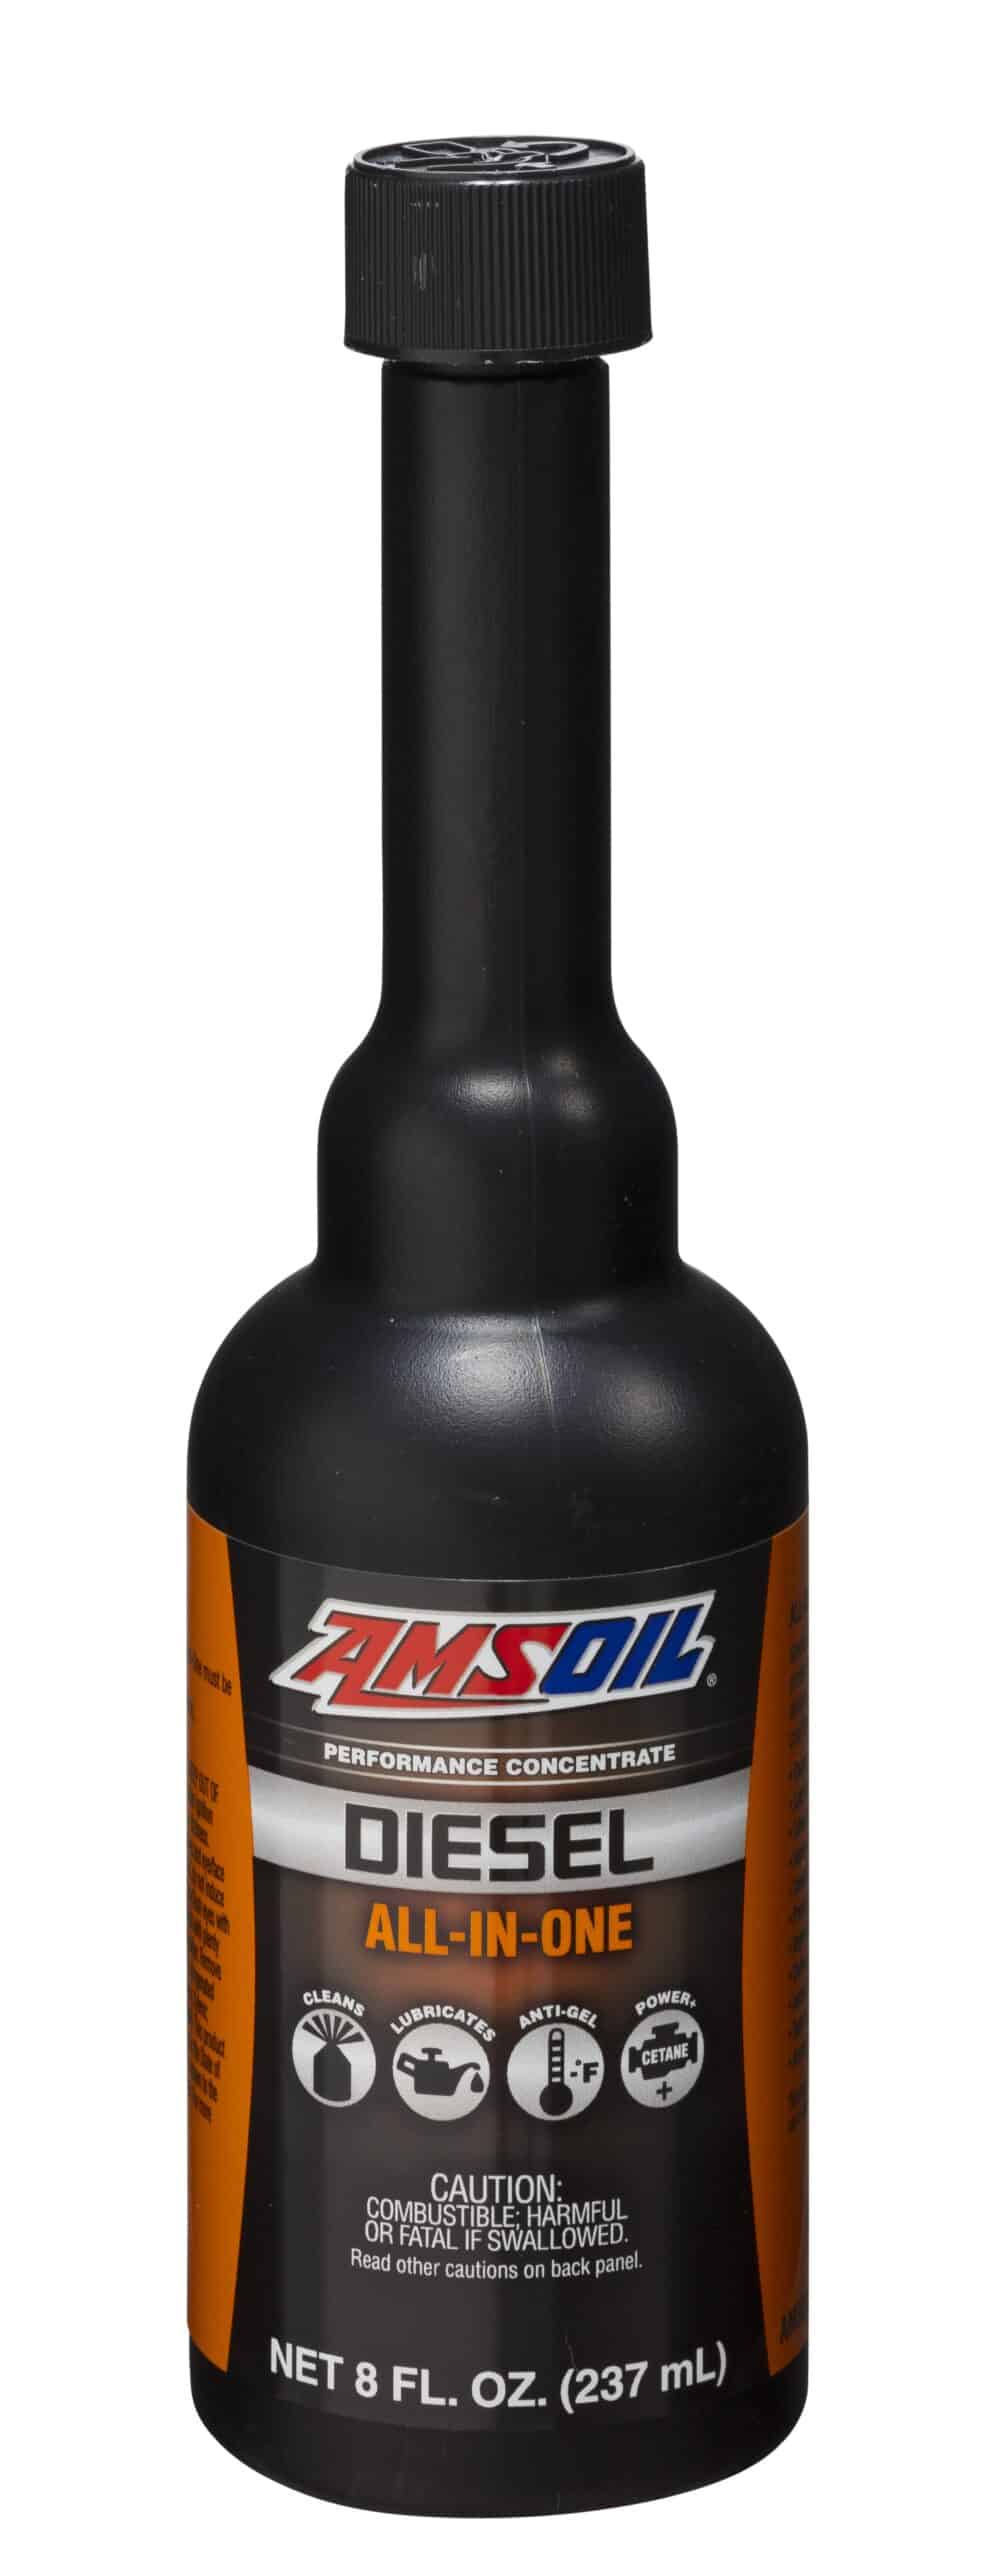 A bottle of AMSOIL Diesel All-In-One, which is specially engineered to provide exceptional all-season protection for a serious performance boost.